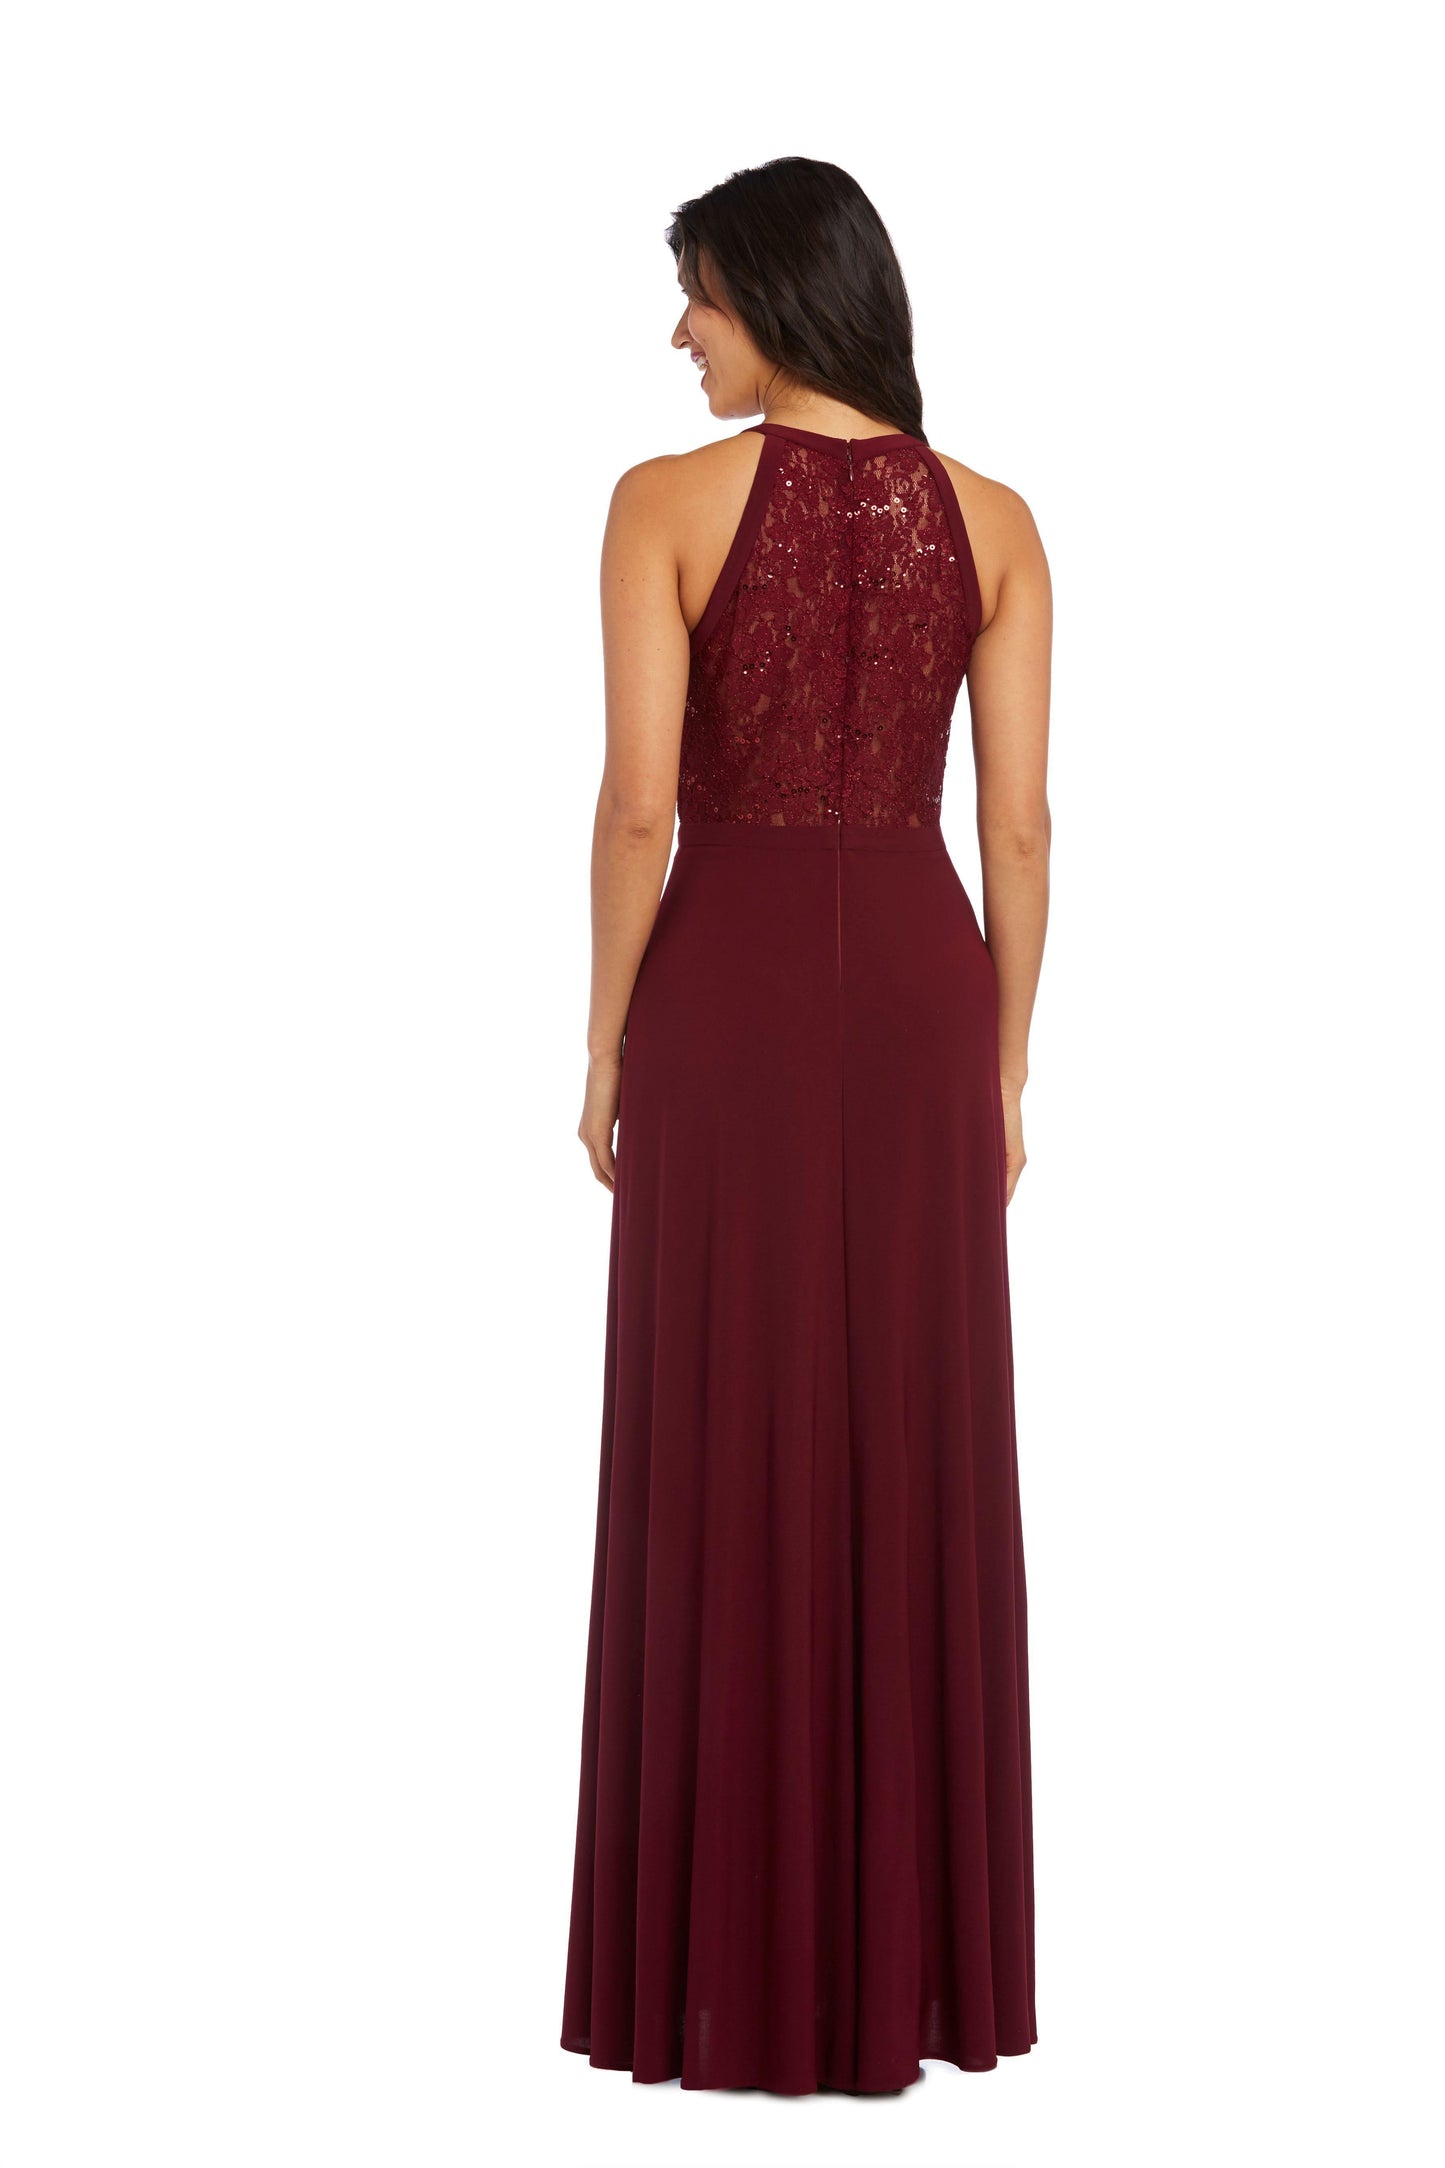 Nightway Long Formal Dress Sale - The Dress Outlet